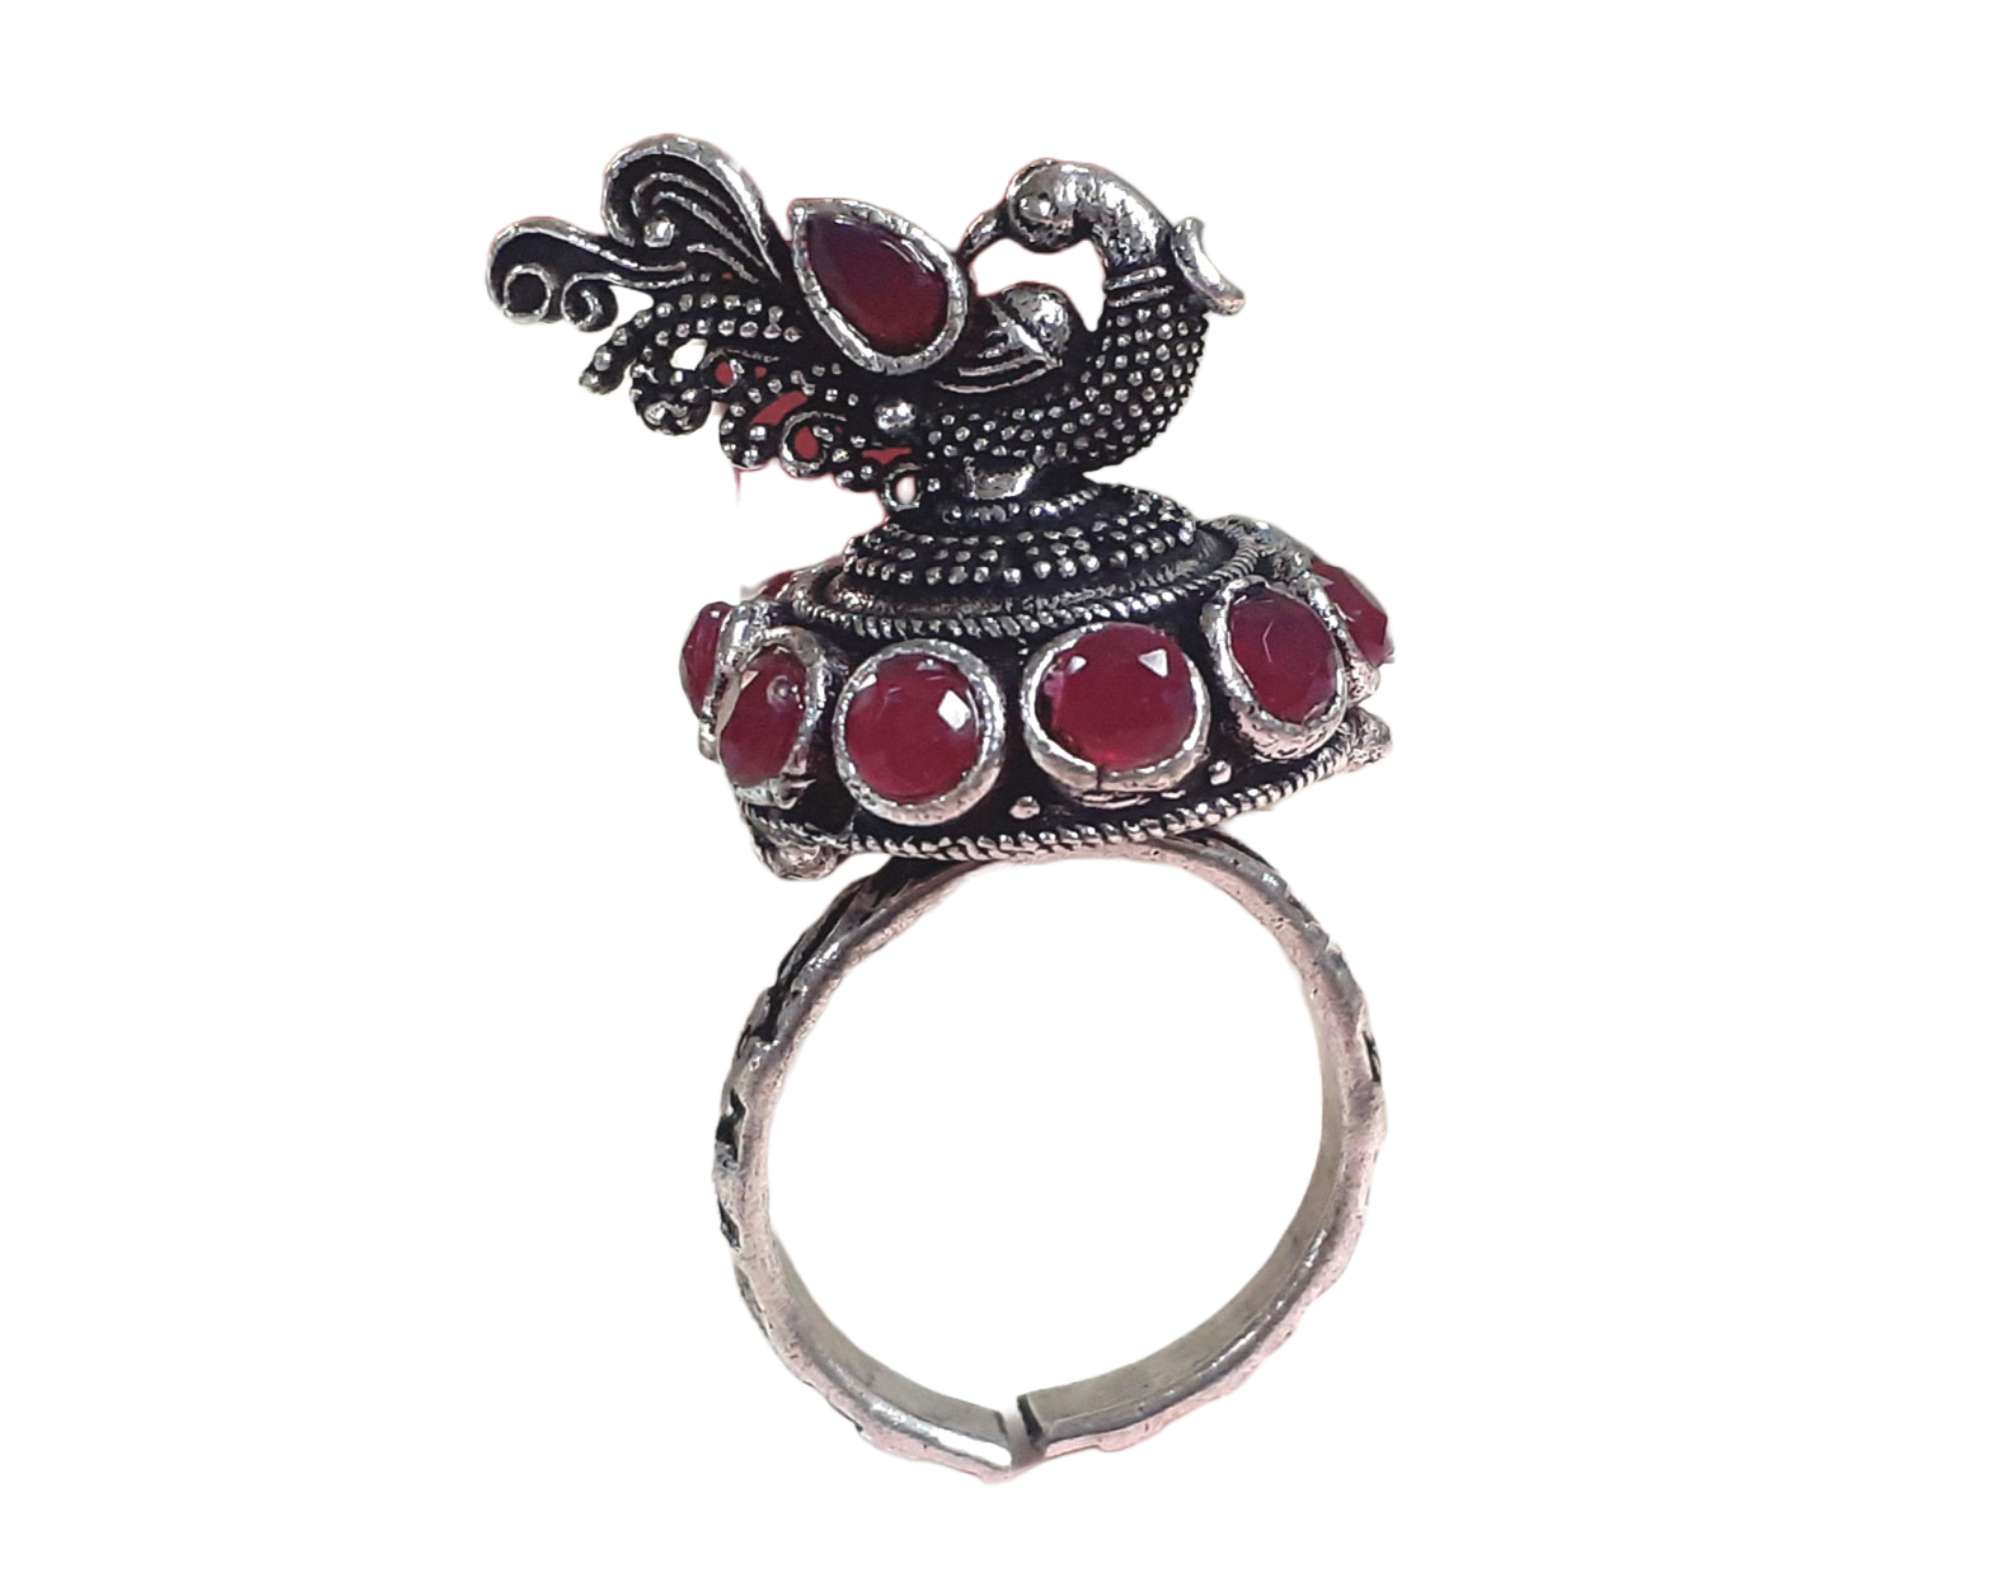 Buy QUEEN-GEMS 7 Ratti Ruby Ring AAA+++ Cushion Shape Ruby Stone Silver Ring  Original Certified Red Ruby Adjustable Ring For Women Manik Stone Silver  Chandi Ring Manikya Anguthi माणिक रत्न ओरिजिनल रिंग